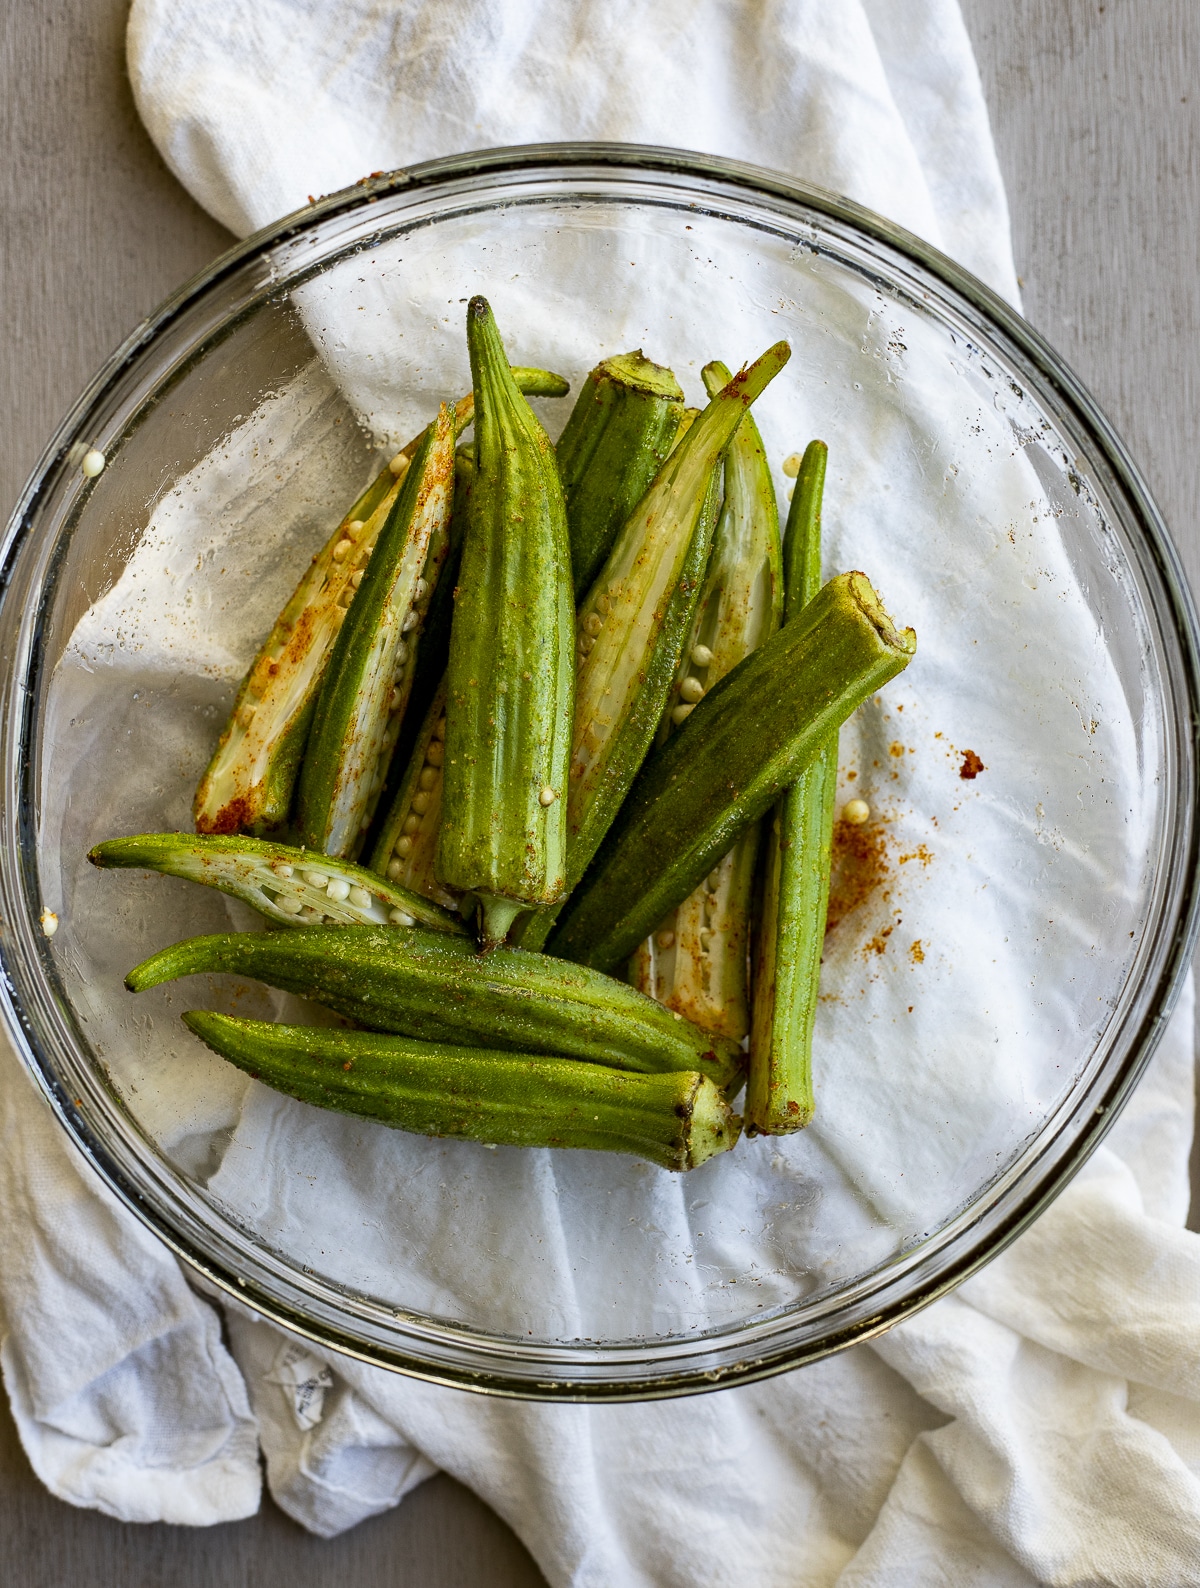 Sliced okra in a glass bowl and tossed with oil and seasonings.